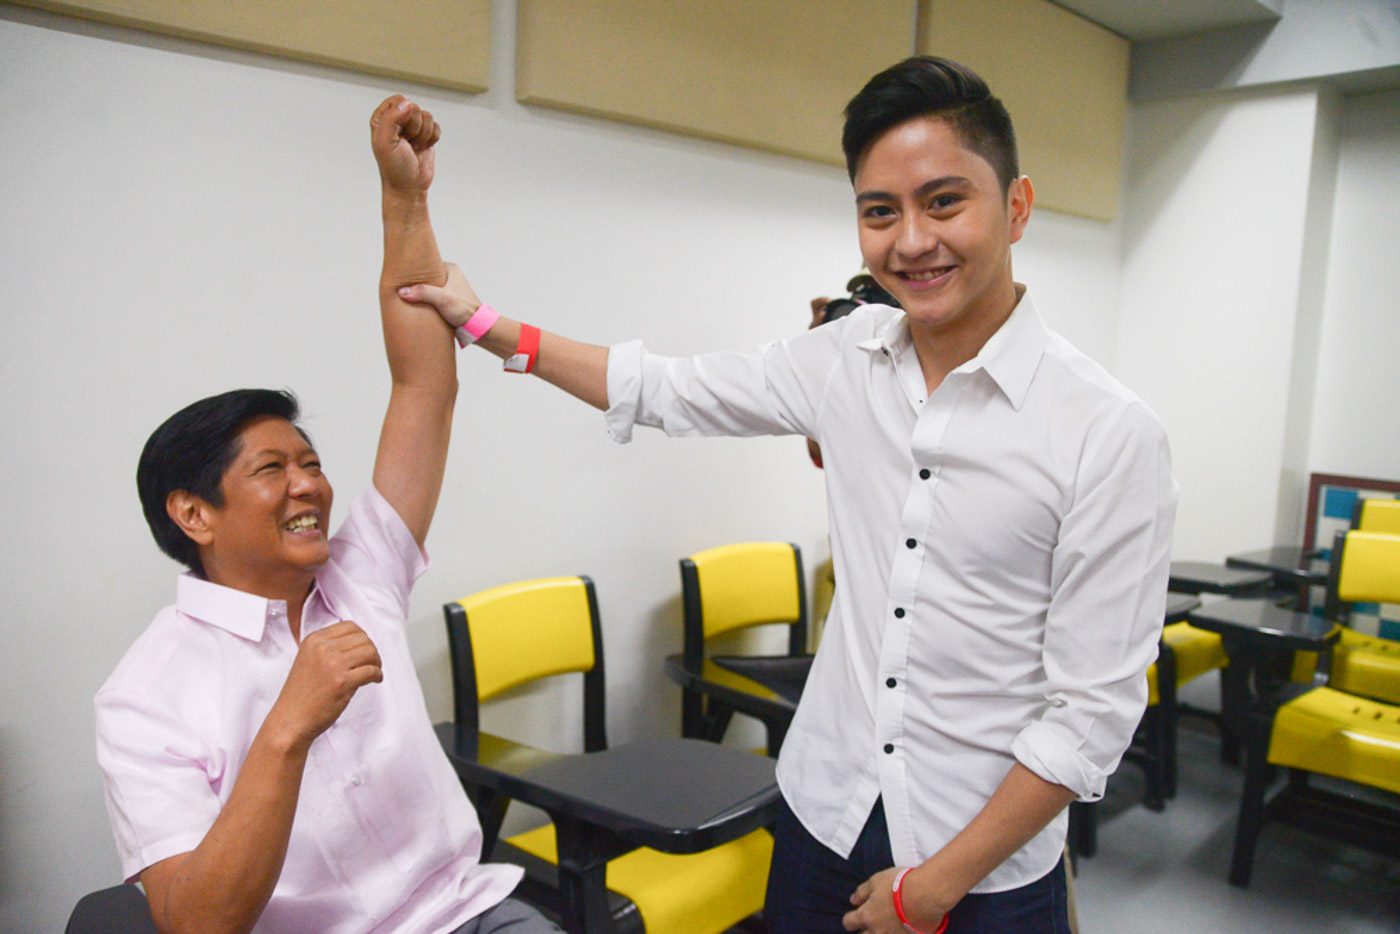 'WINNER.'  Sandro Marcos congratulates his father after the debate. Photo by Jansen Romero   